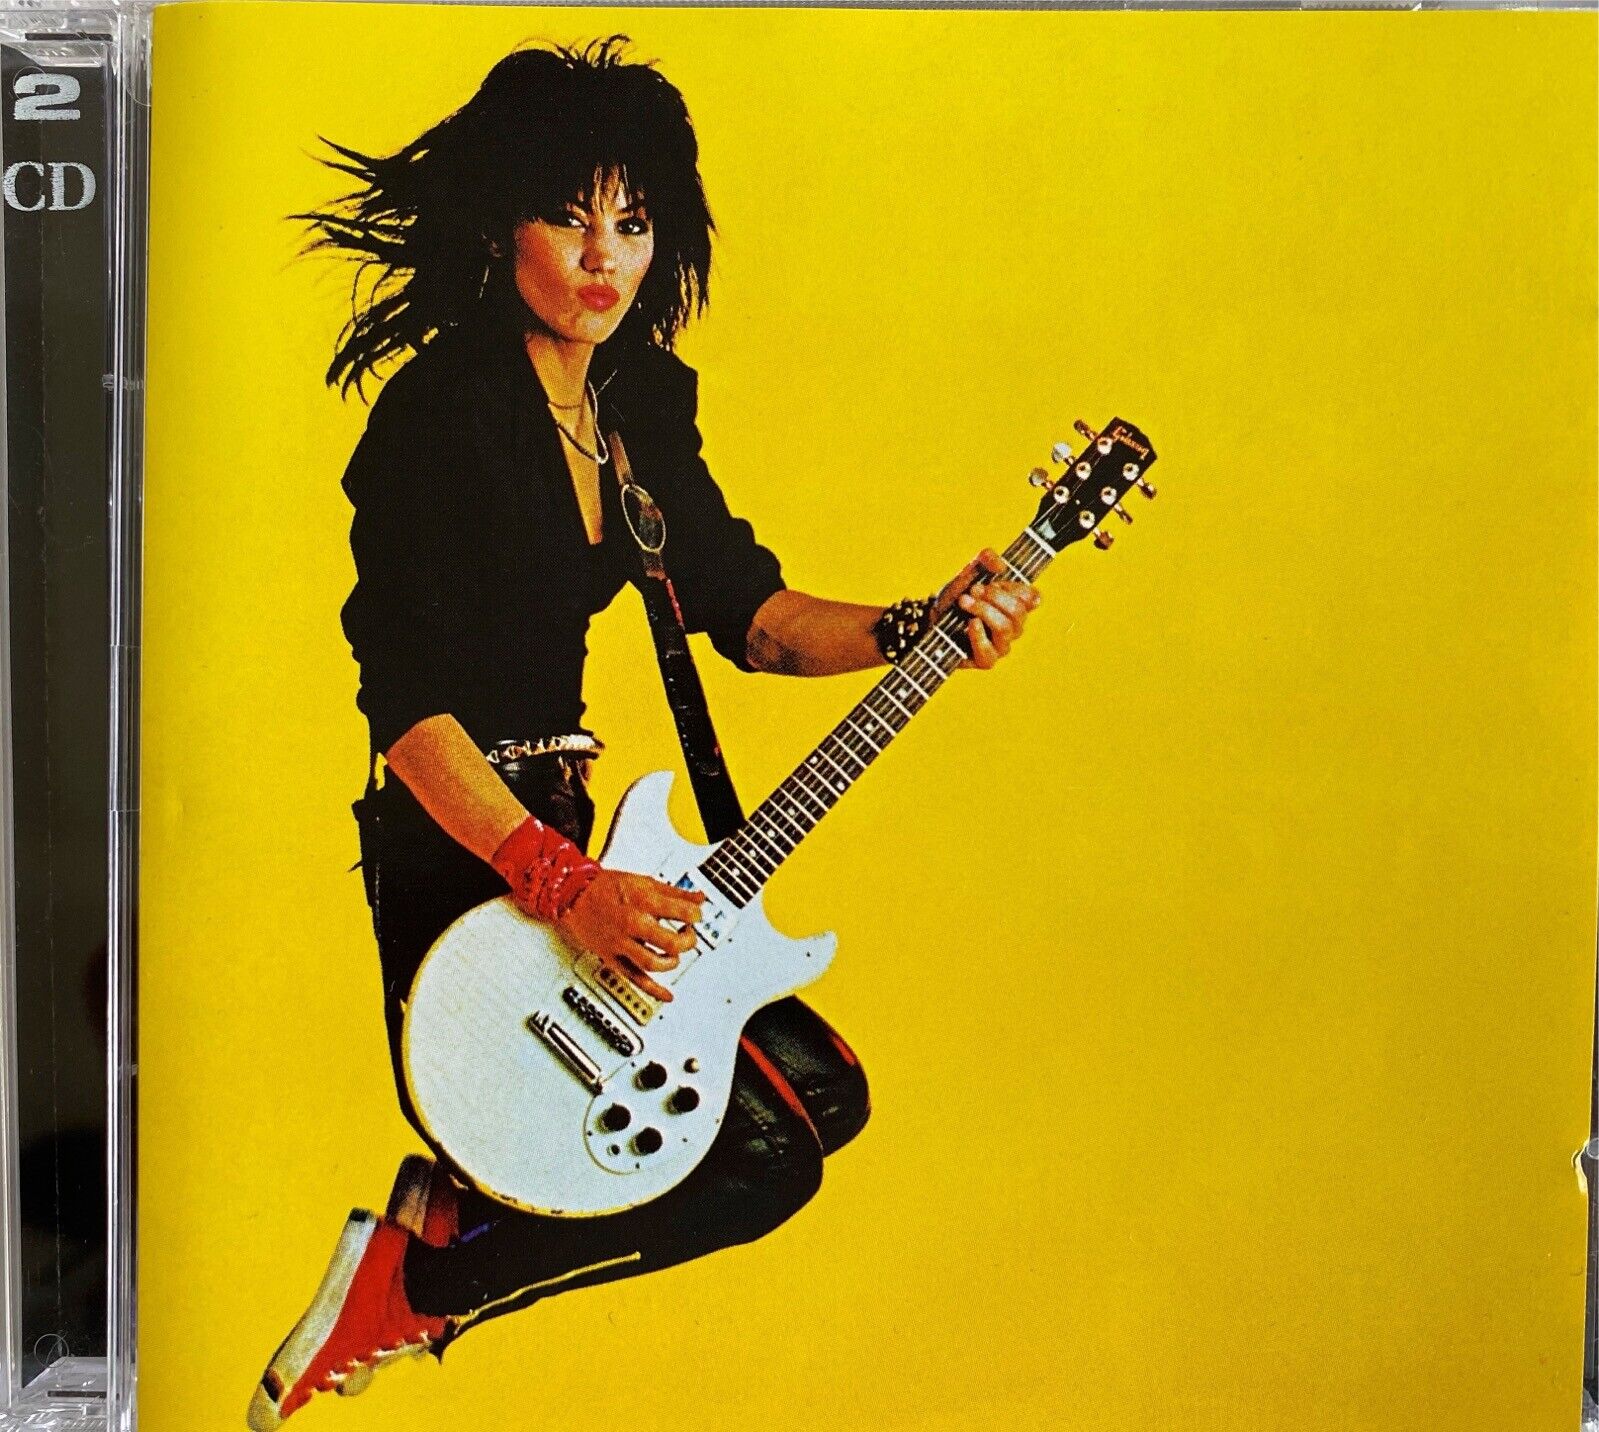 JOAN JETT - Album/Glorious Results Of A Misspent Youth 2 x CD 2006 AS NEW